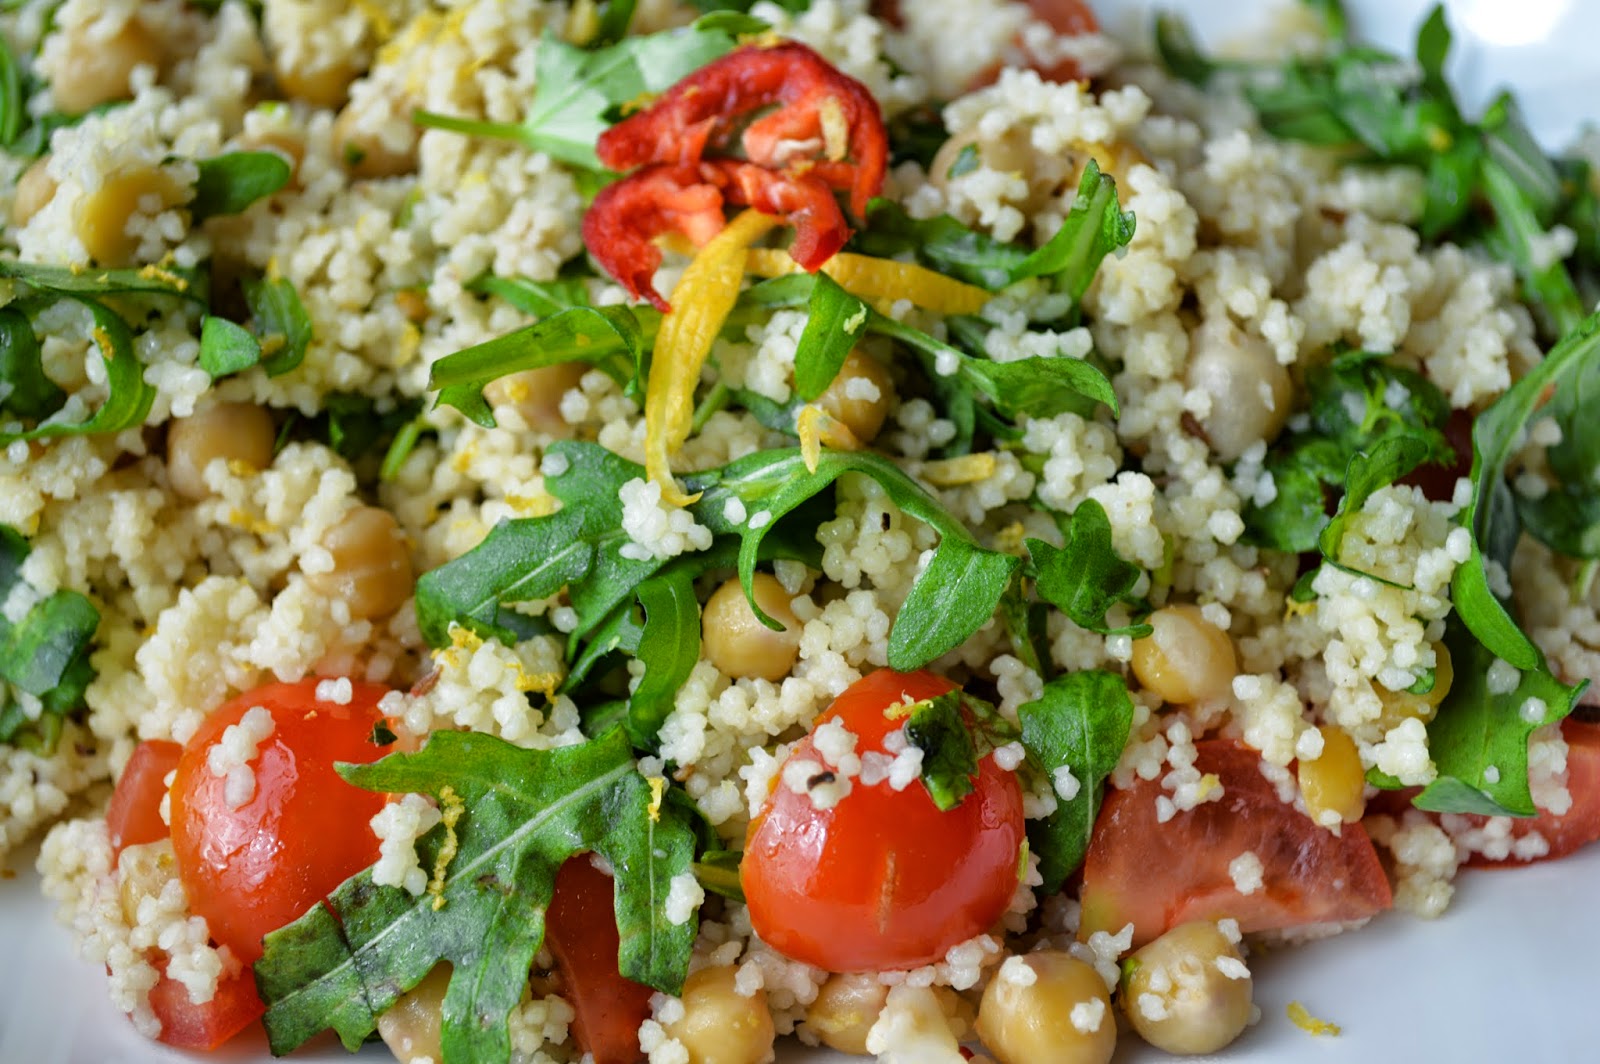 Chick pea, Rocket and cous cous salad with Lemon dressing